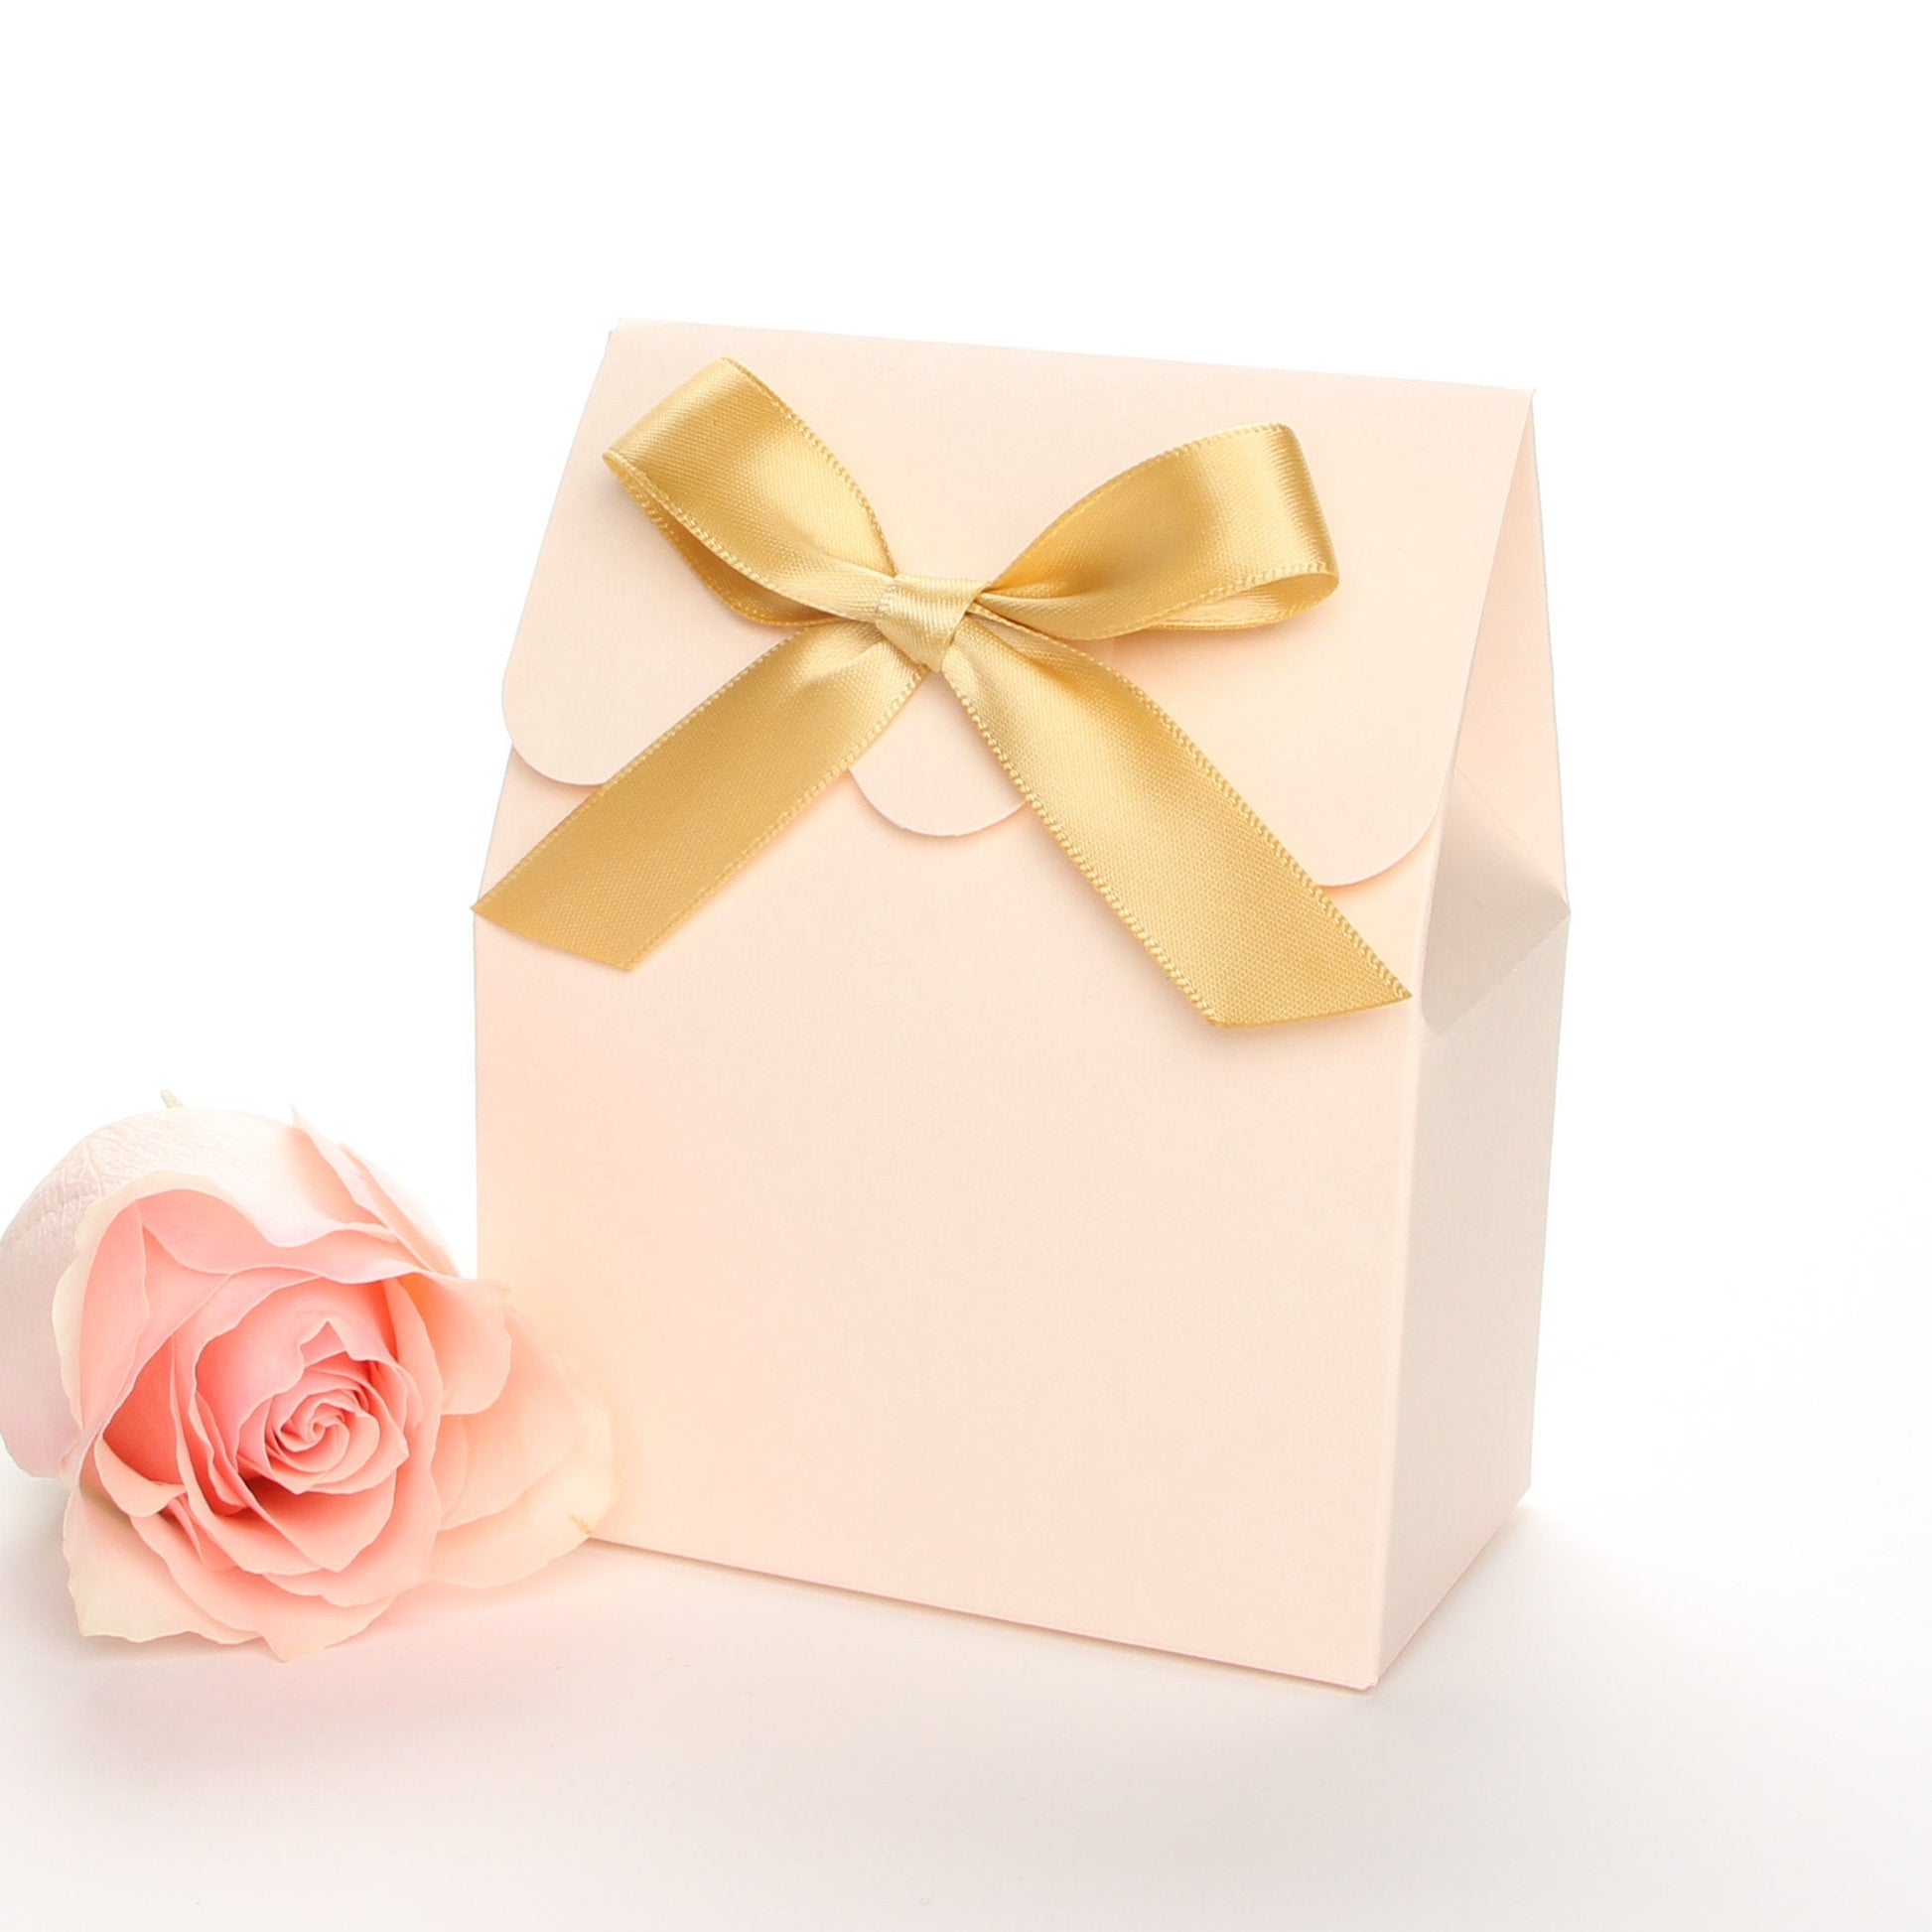 Lux Party’s blush favor box with a scalloped edge and a gold bow next to a pink rose.